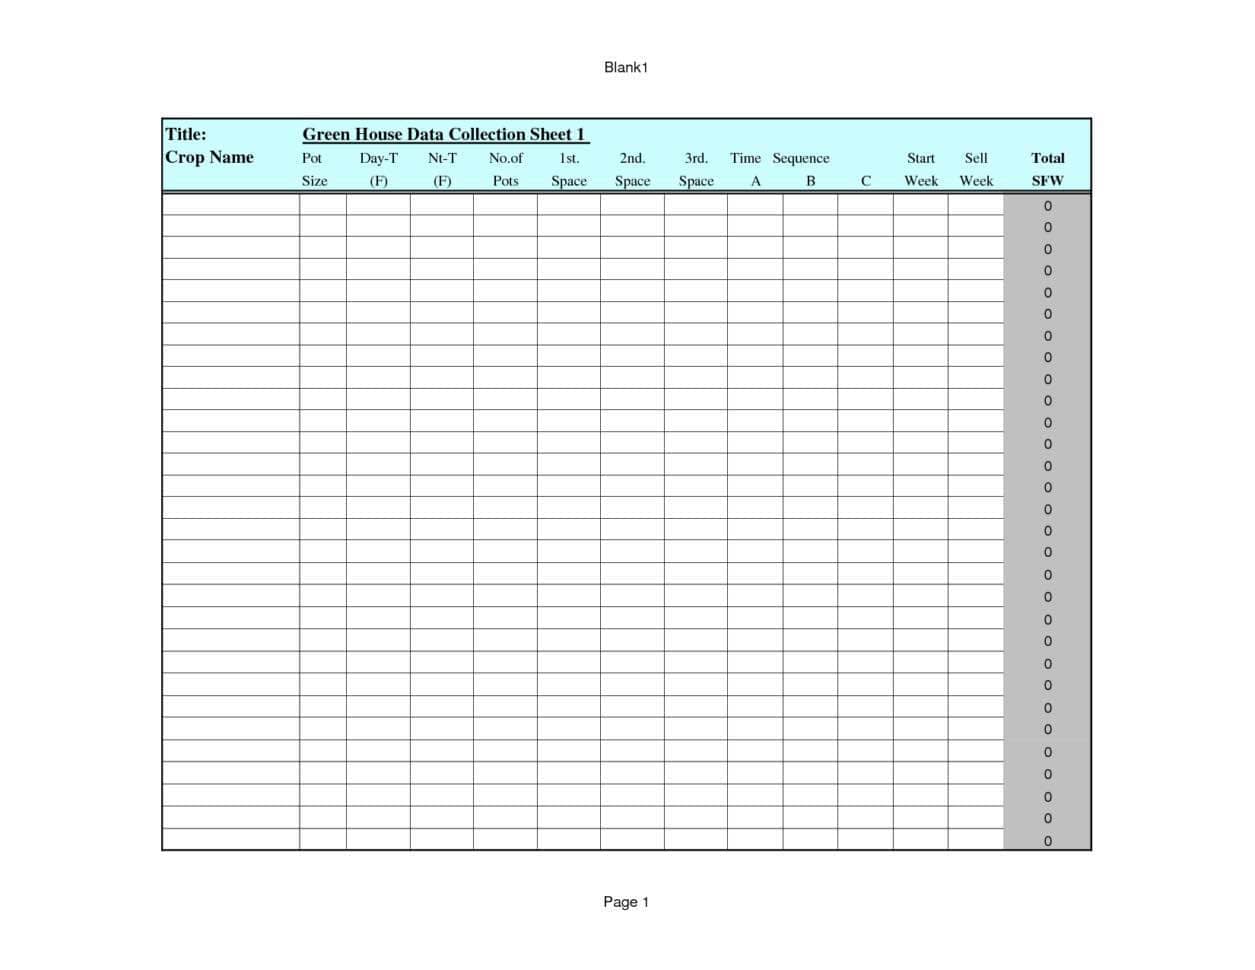 Business Accounting Spreadsheet And Basic Business Accounting Spreadsheet